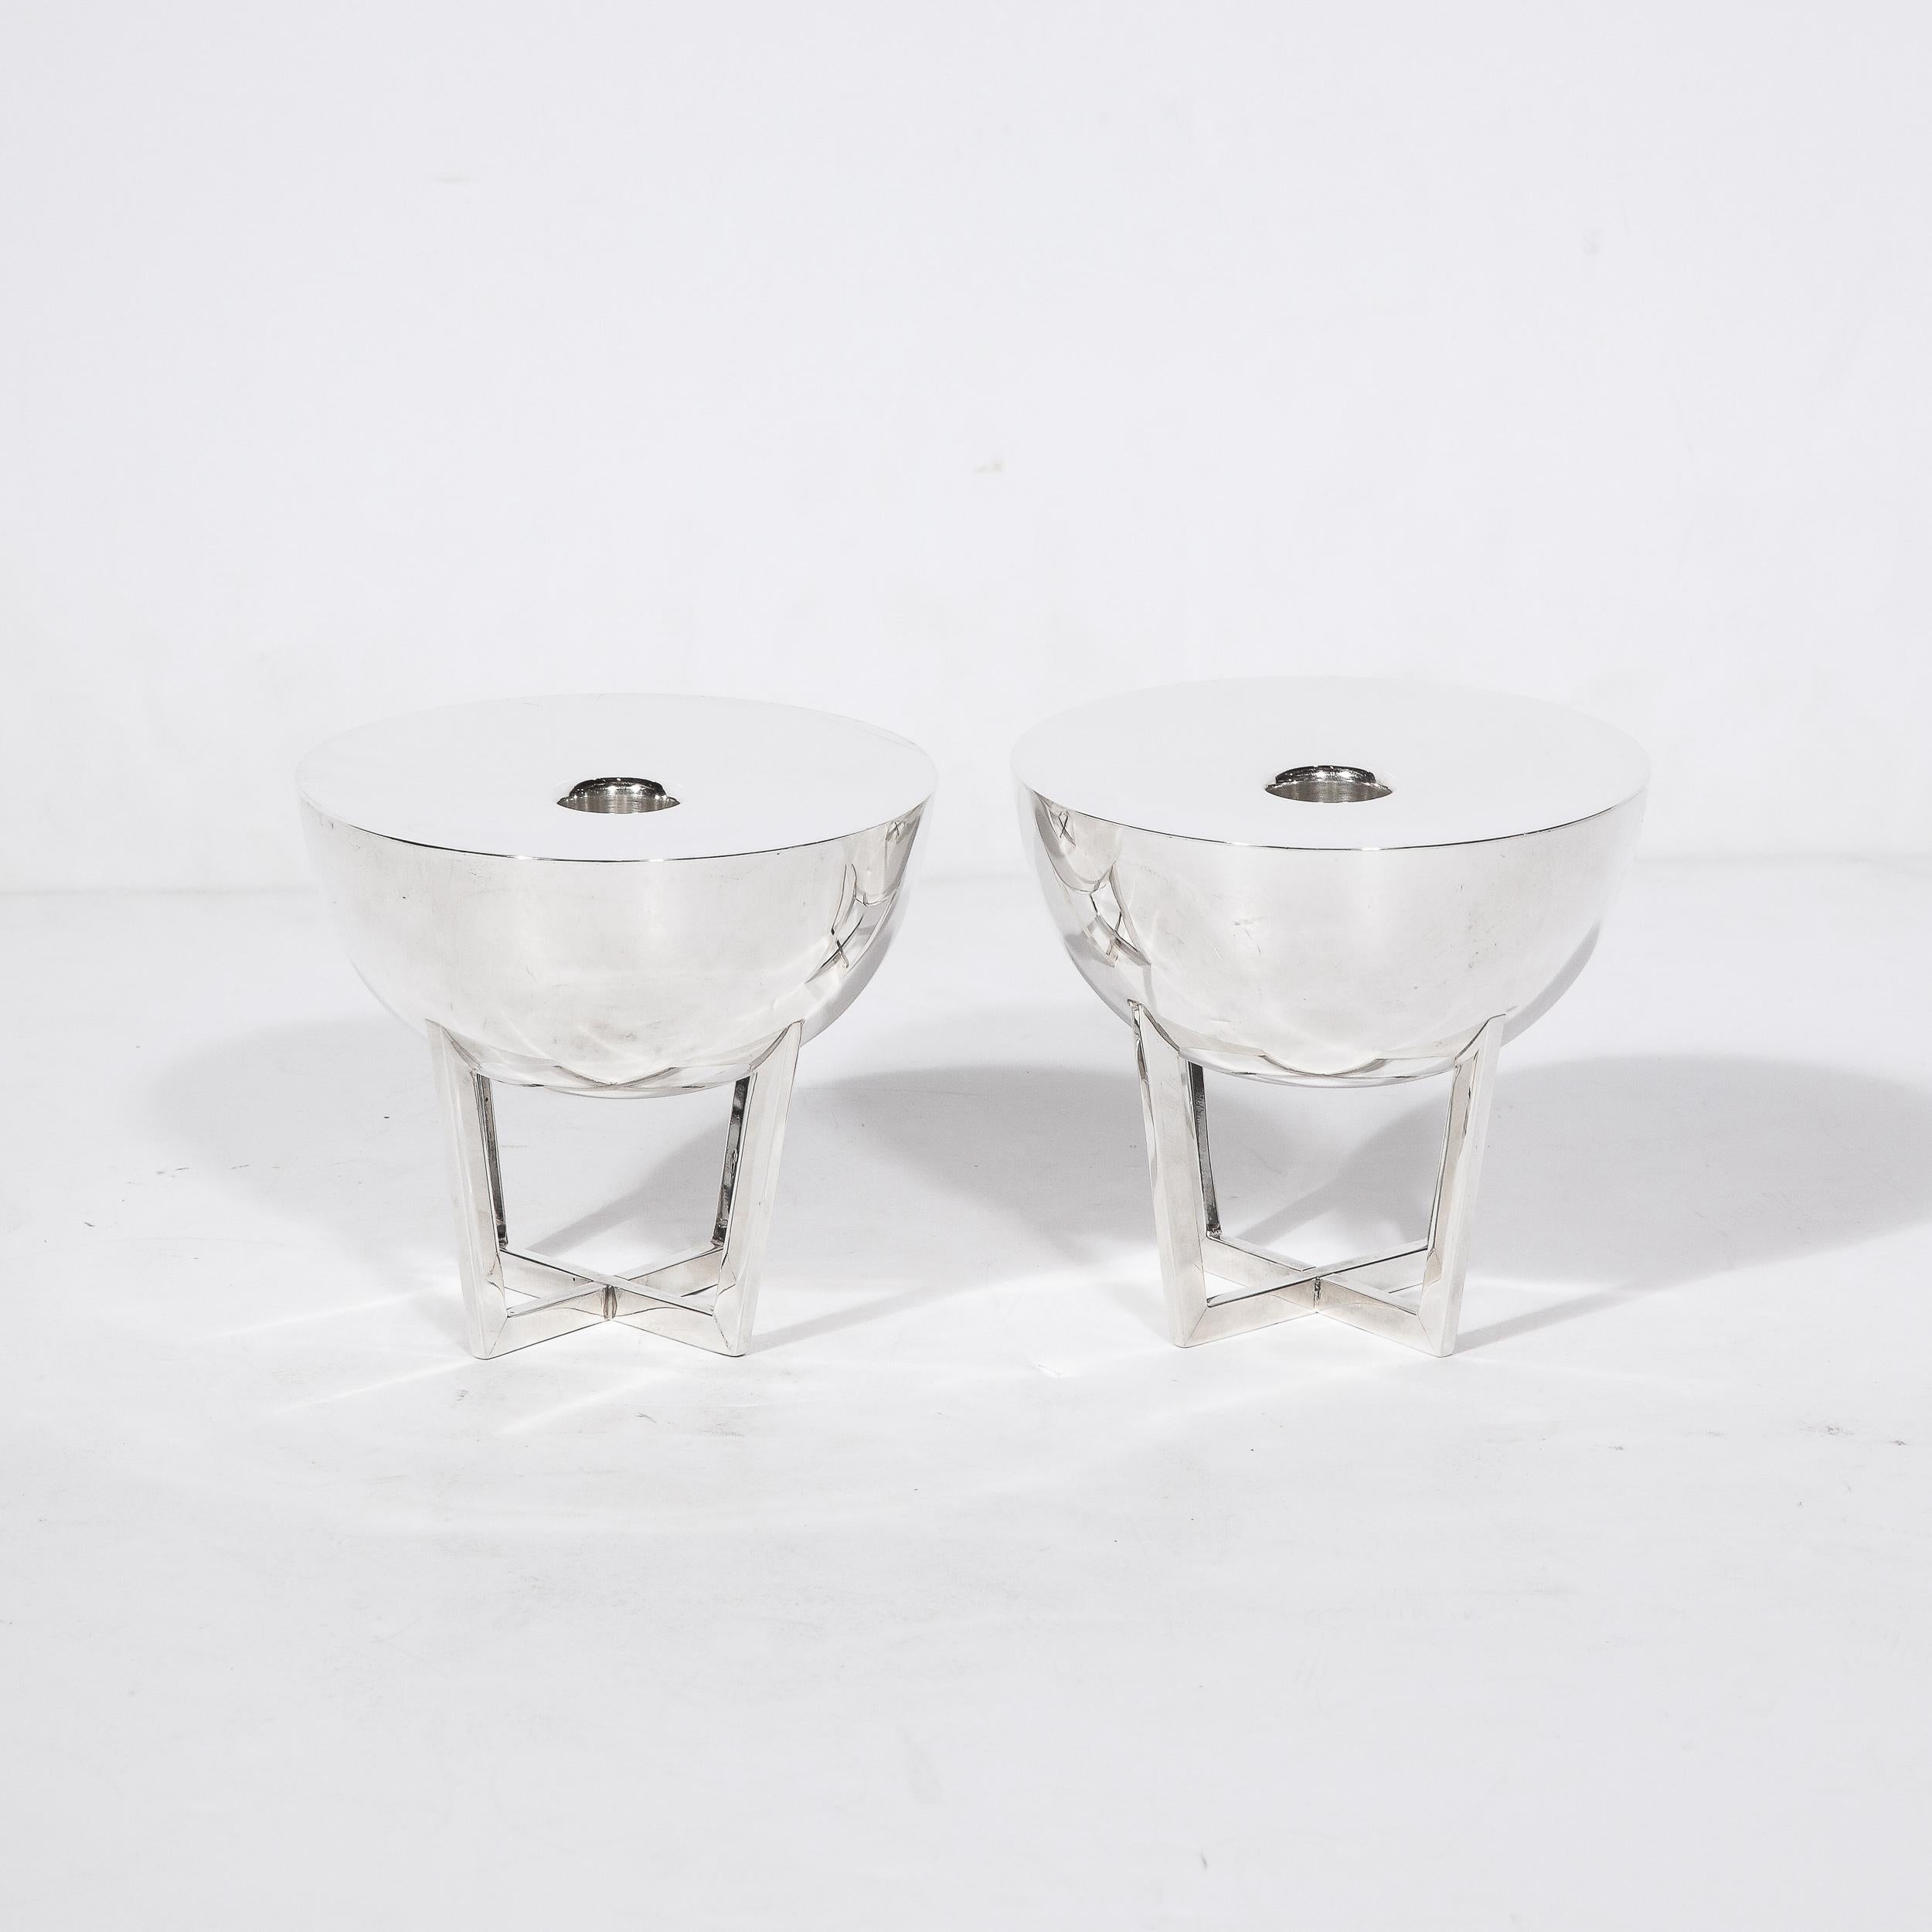 This rare pair of silver candle holders is made by the designer Allen Adler. Adler is well respected as one of the greatest American silver designers in history; his work was included in major museums and private collections worldwide. His designs